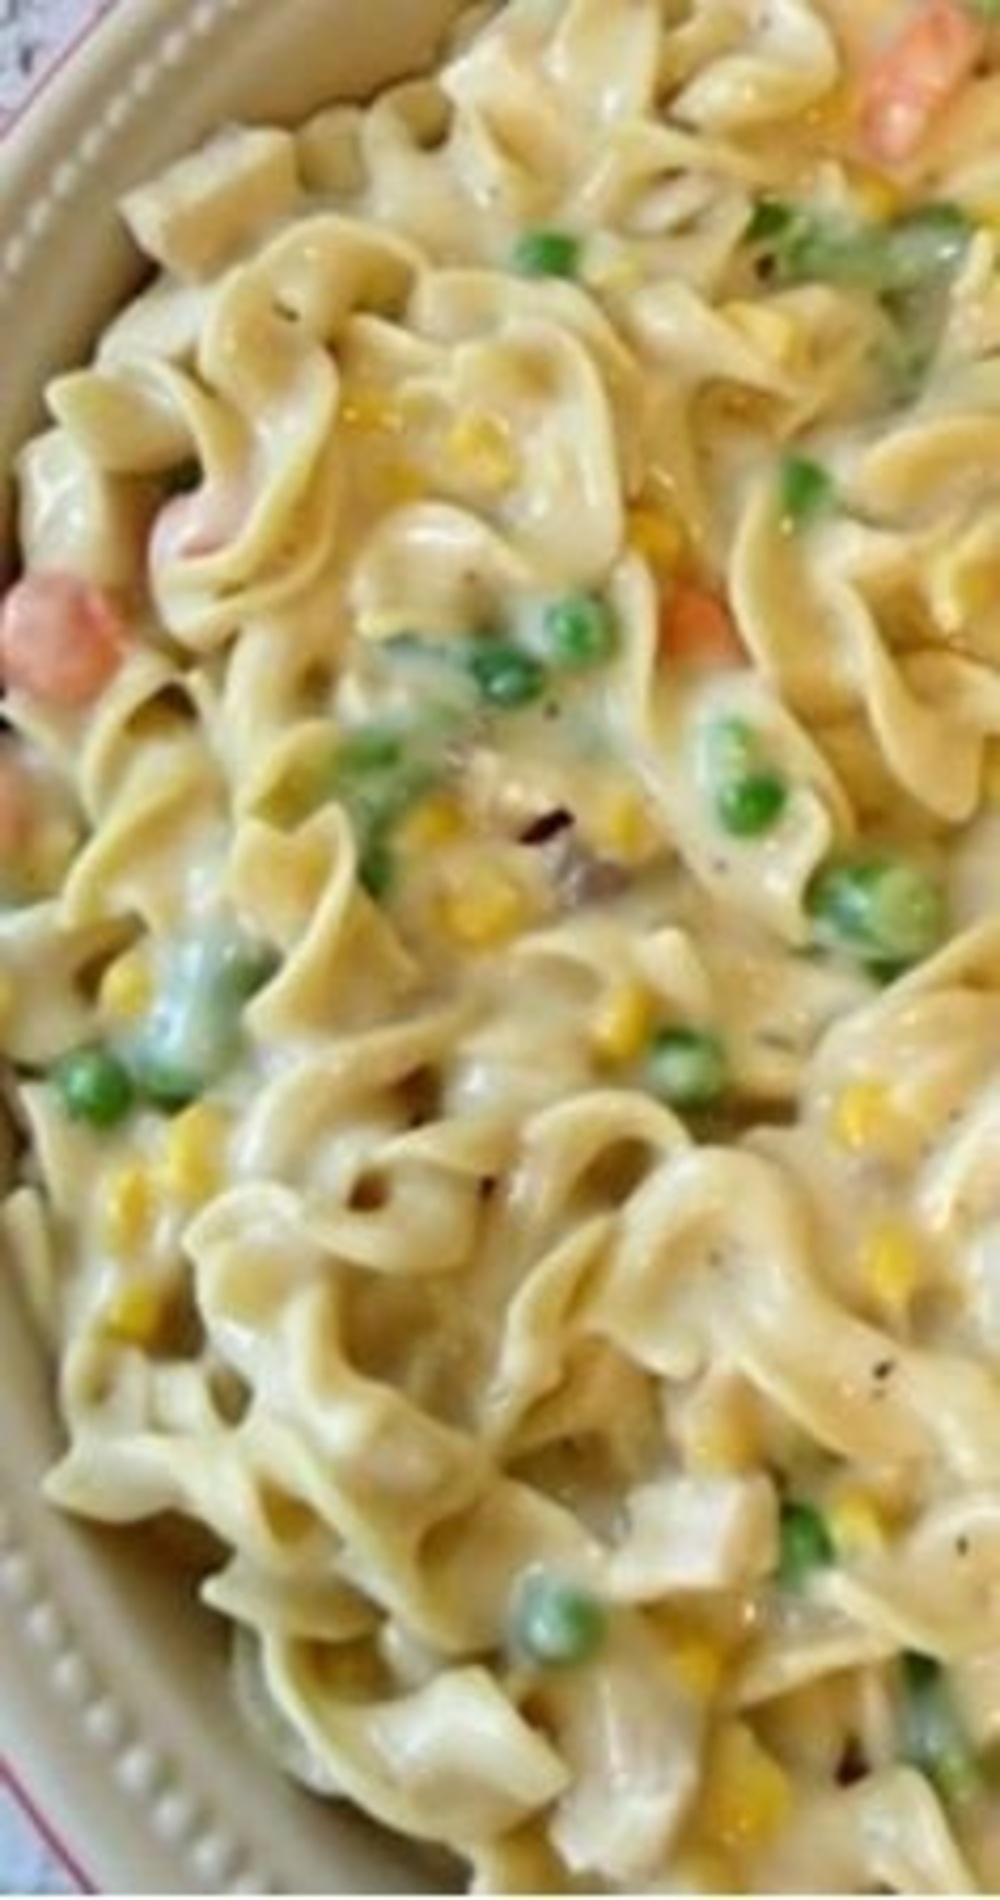 How to Make Chicken Noodle Casserole